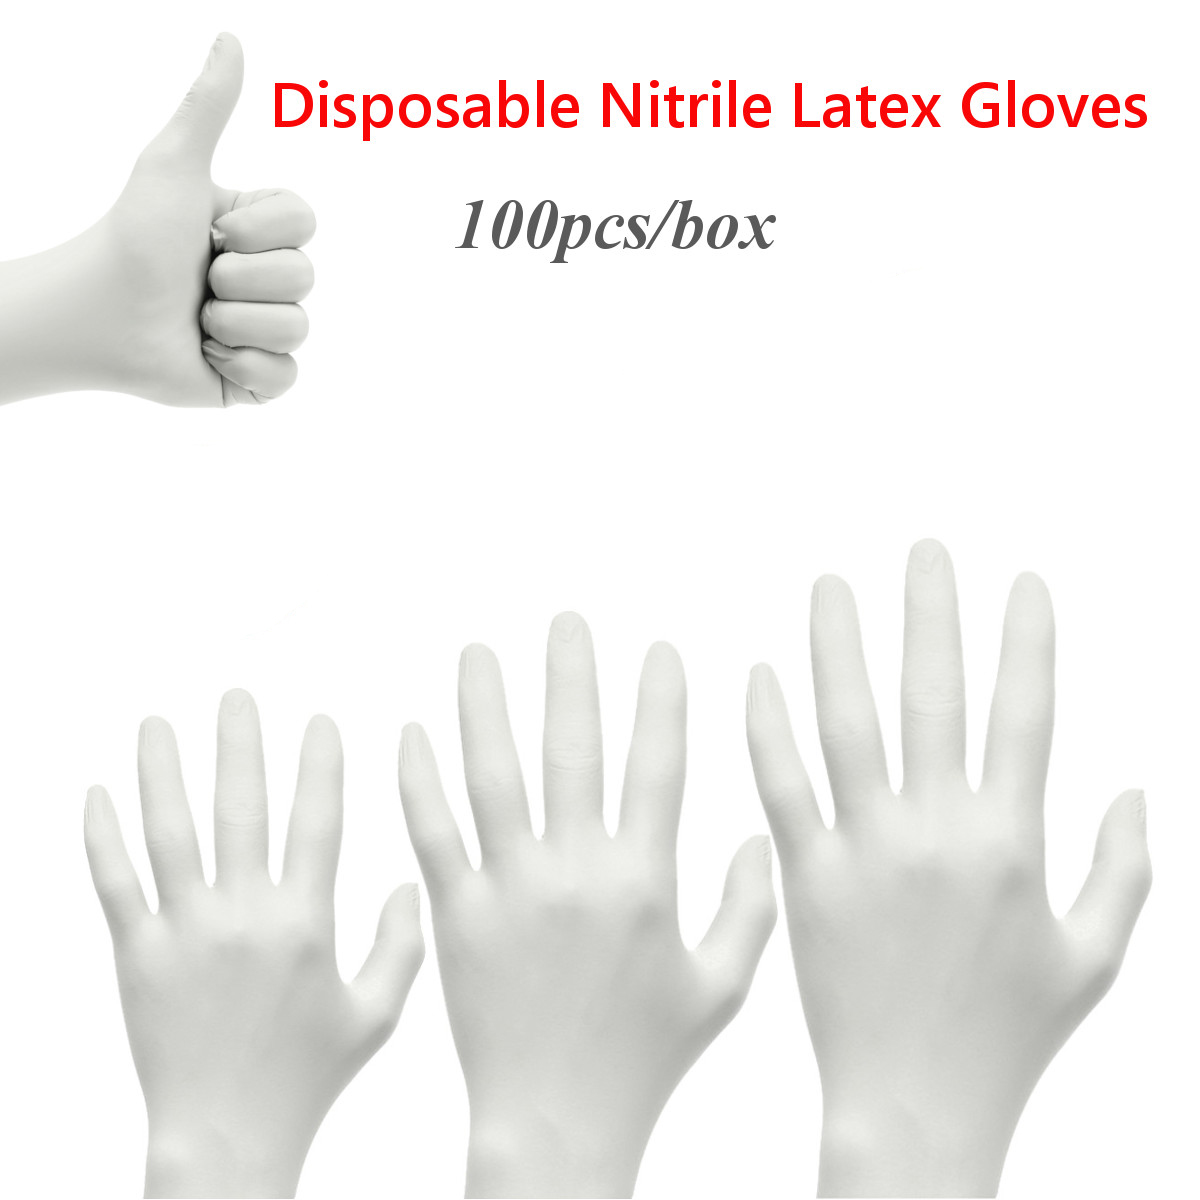 100-pcs-White-Thickness-Disposable-Nitrile-Latex-Gloves-Waterproof-Kitchen-Safety-Food-Prep-Cooking--1654524-1